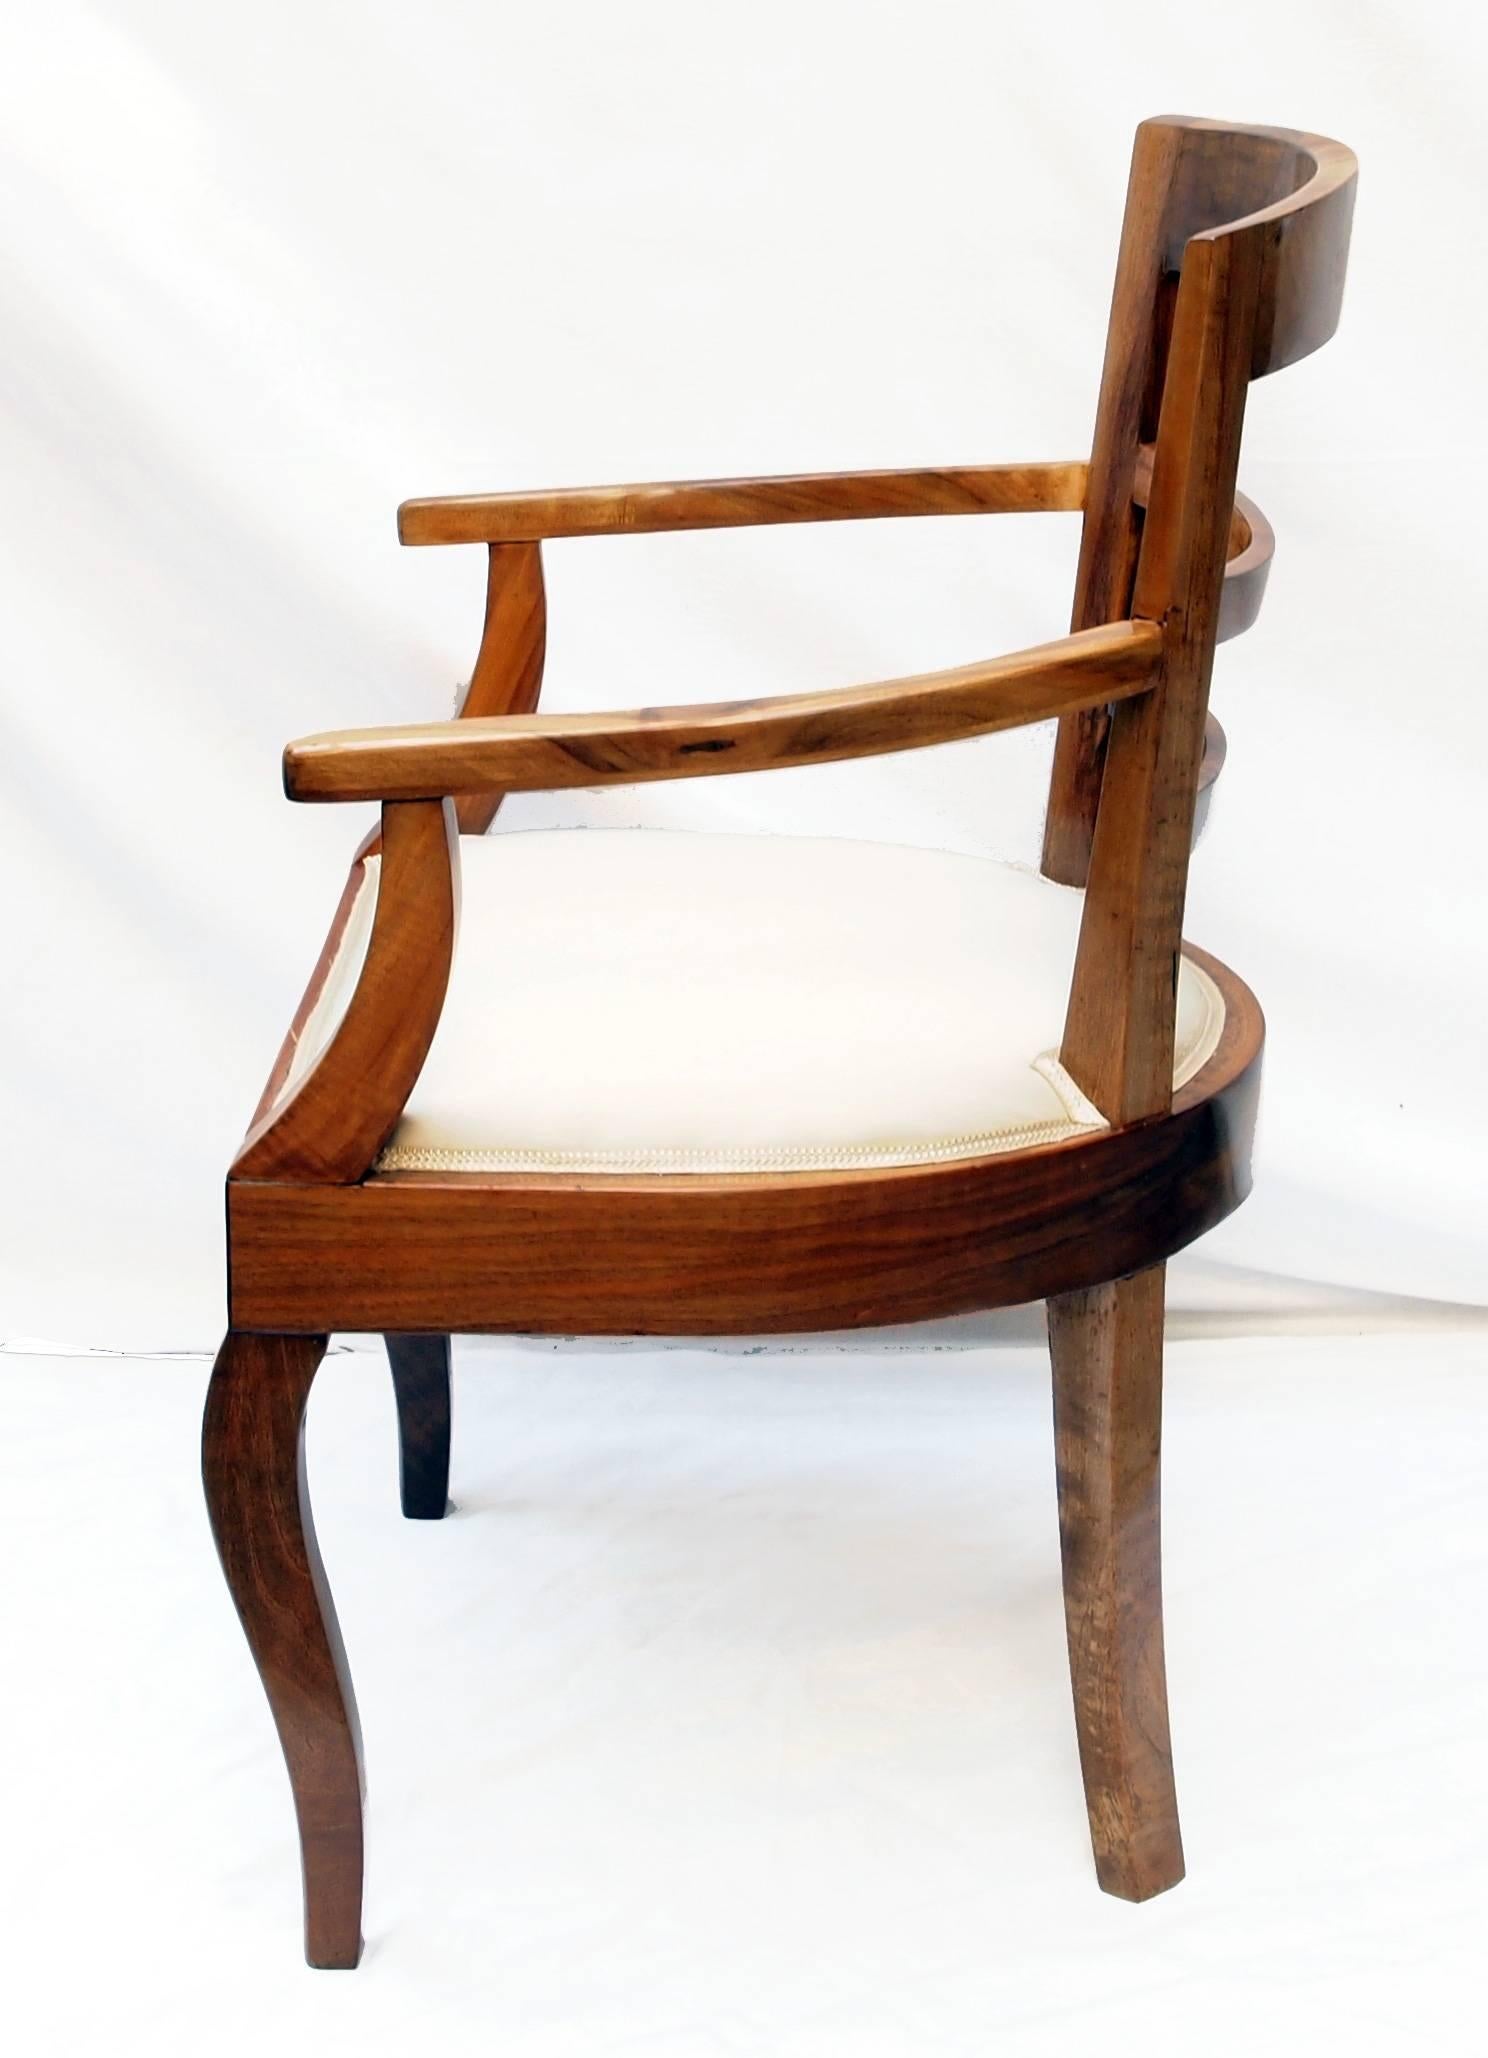 Beautiful Biedermeier armchair from Germany, very good restorated condition. Solid walnut wood and completely new upholstered.

Measures: Seat height 43 cm.